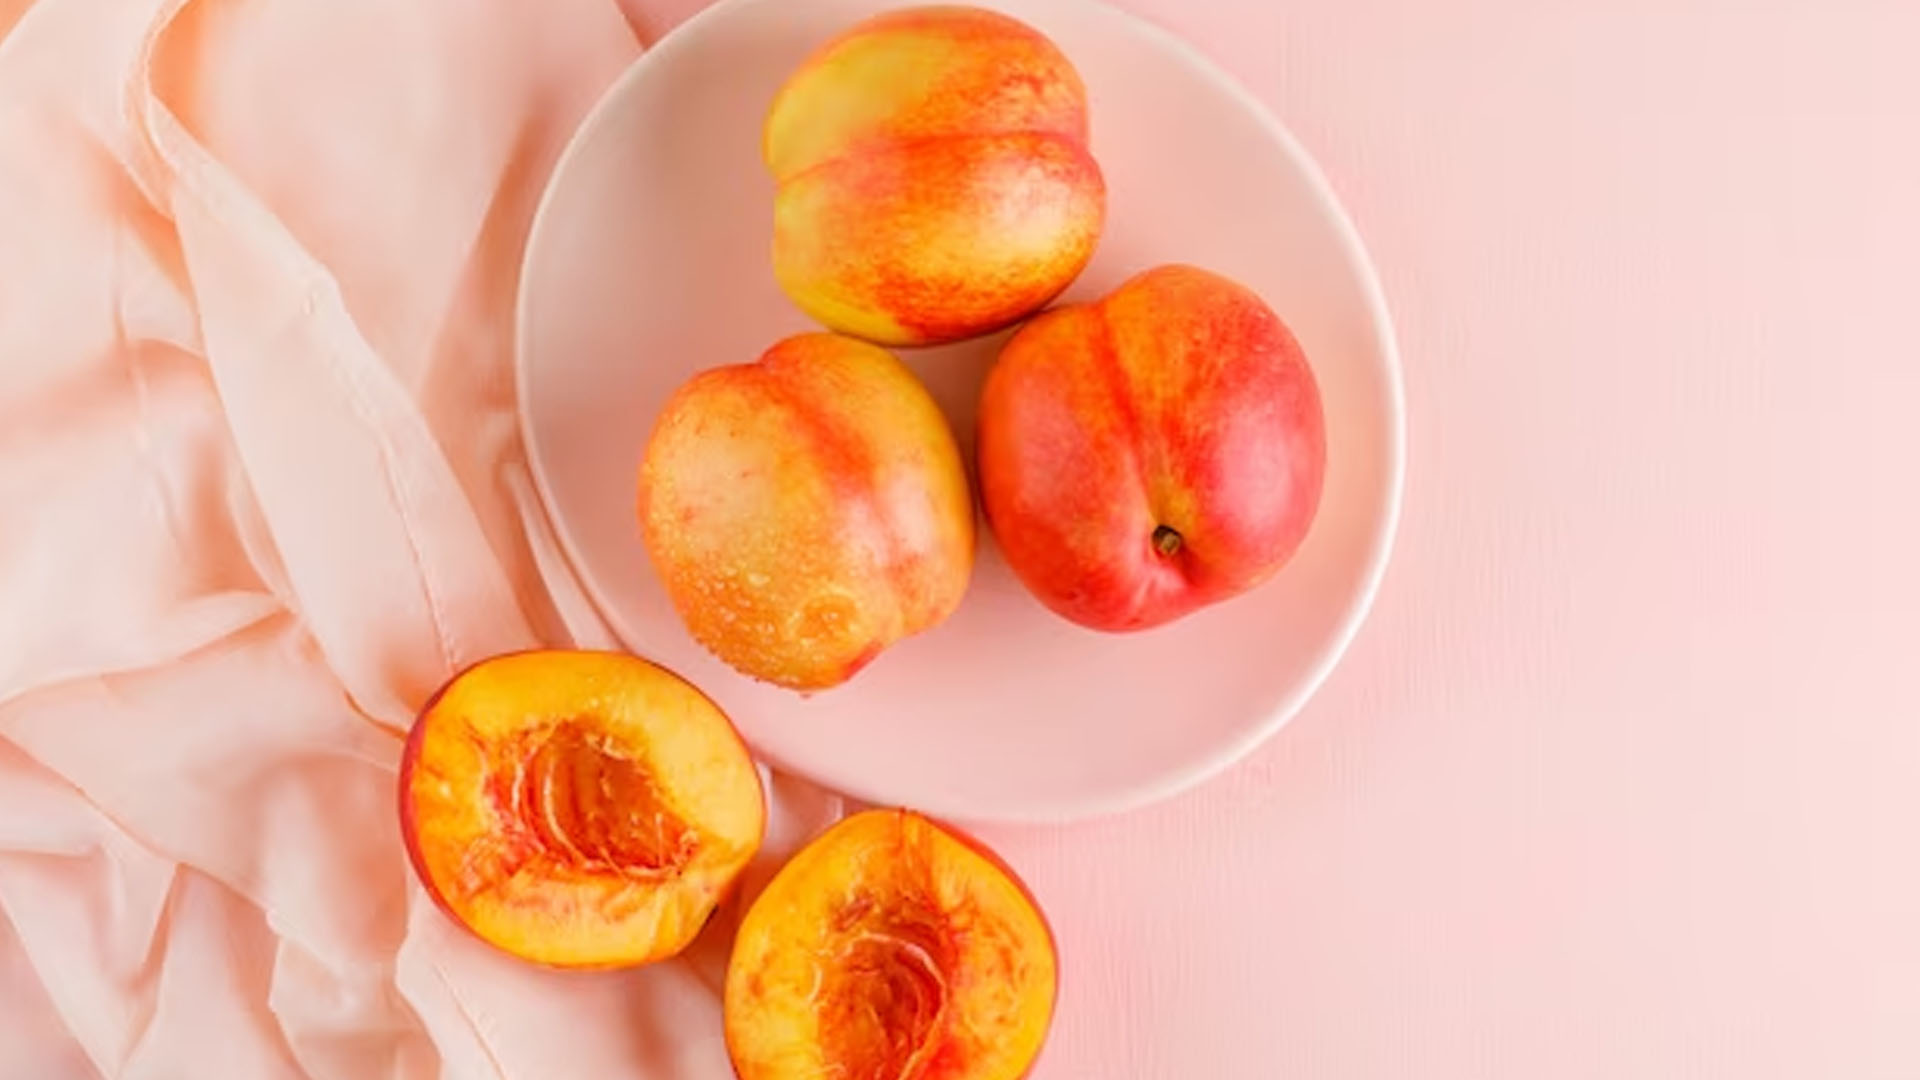 What Are The Health Benefits of Nectarines?